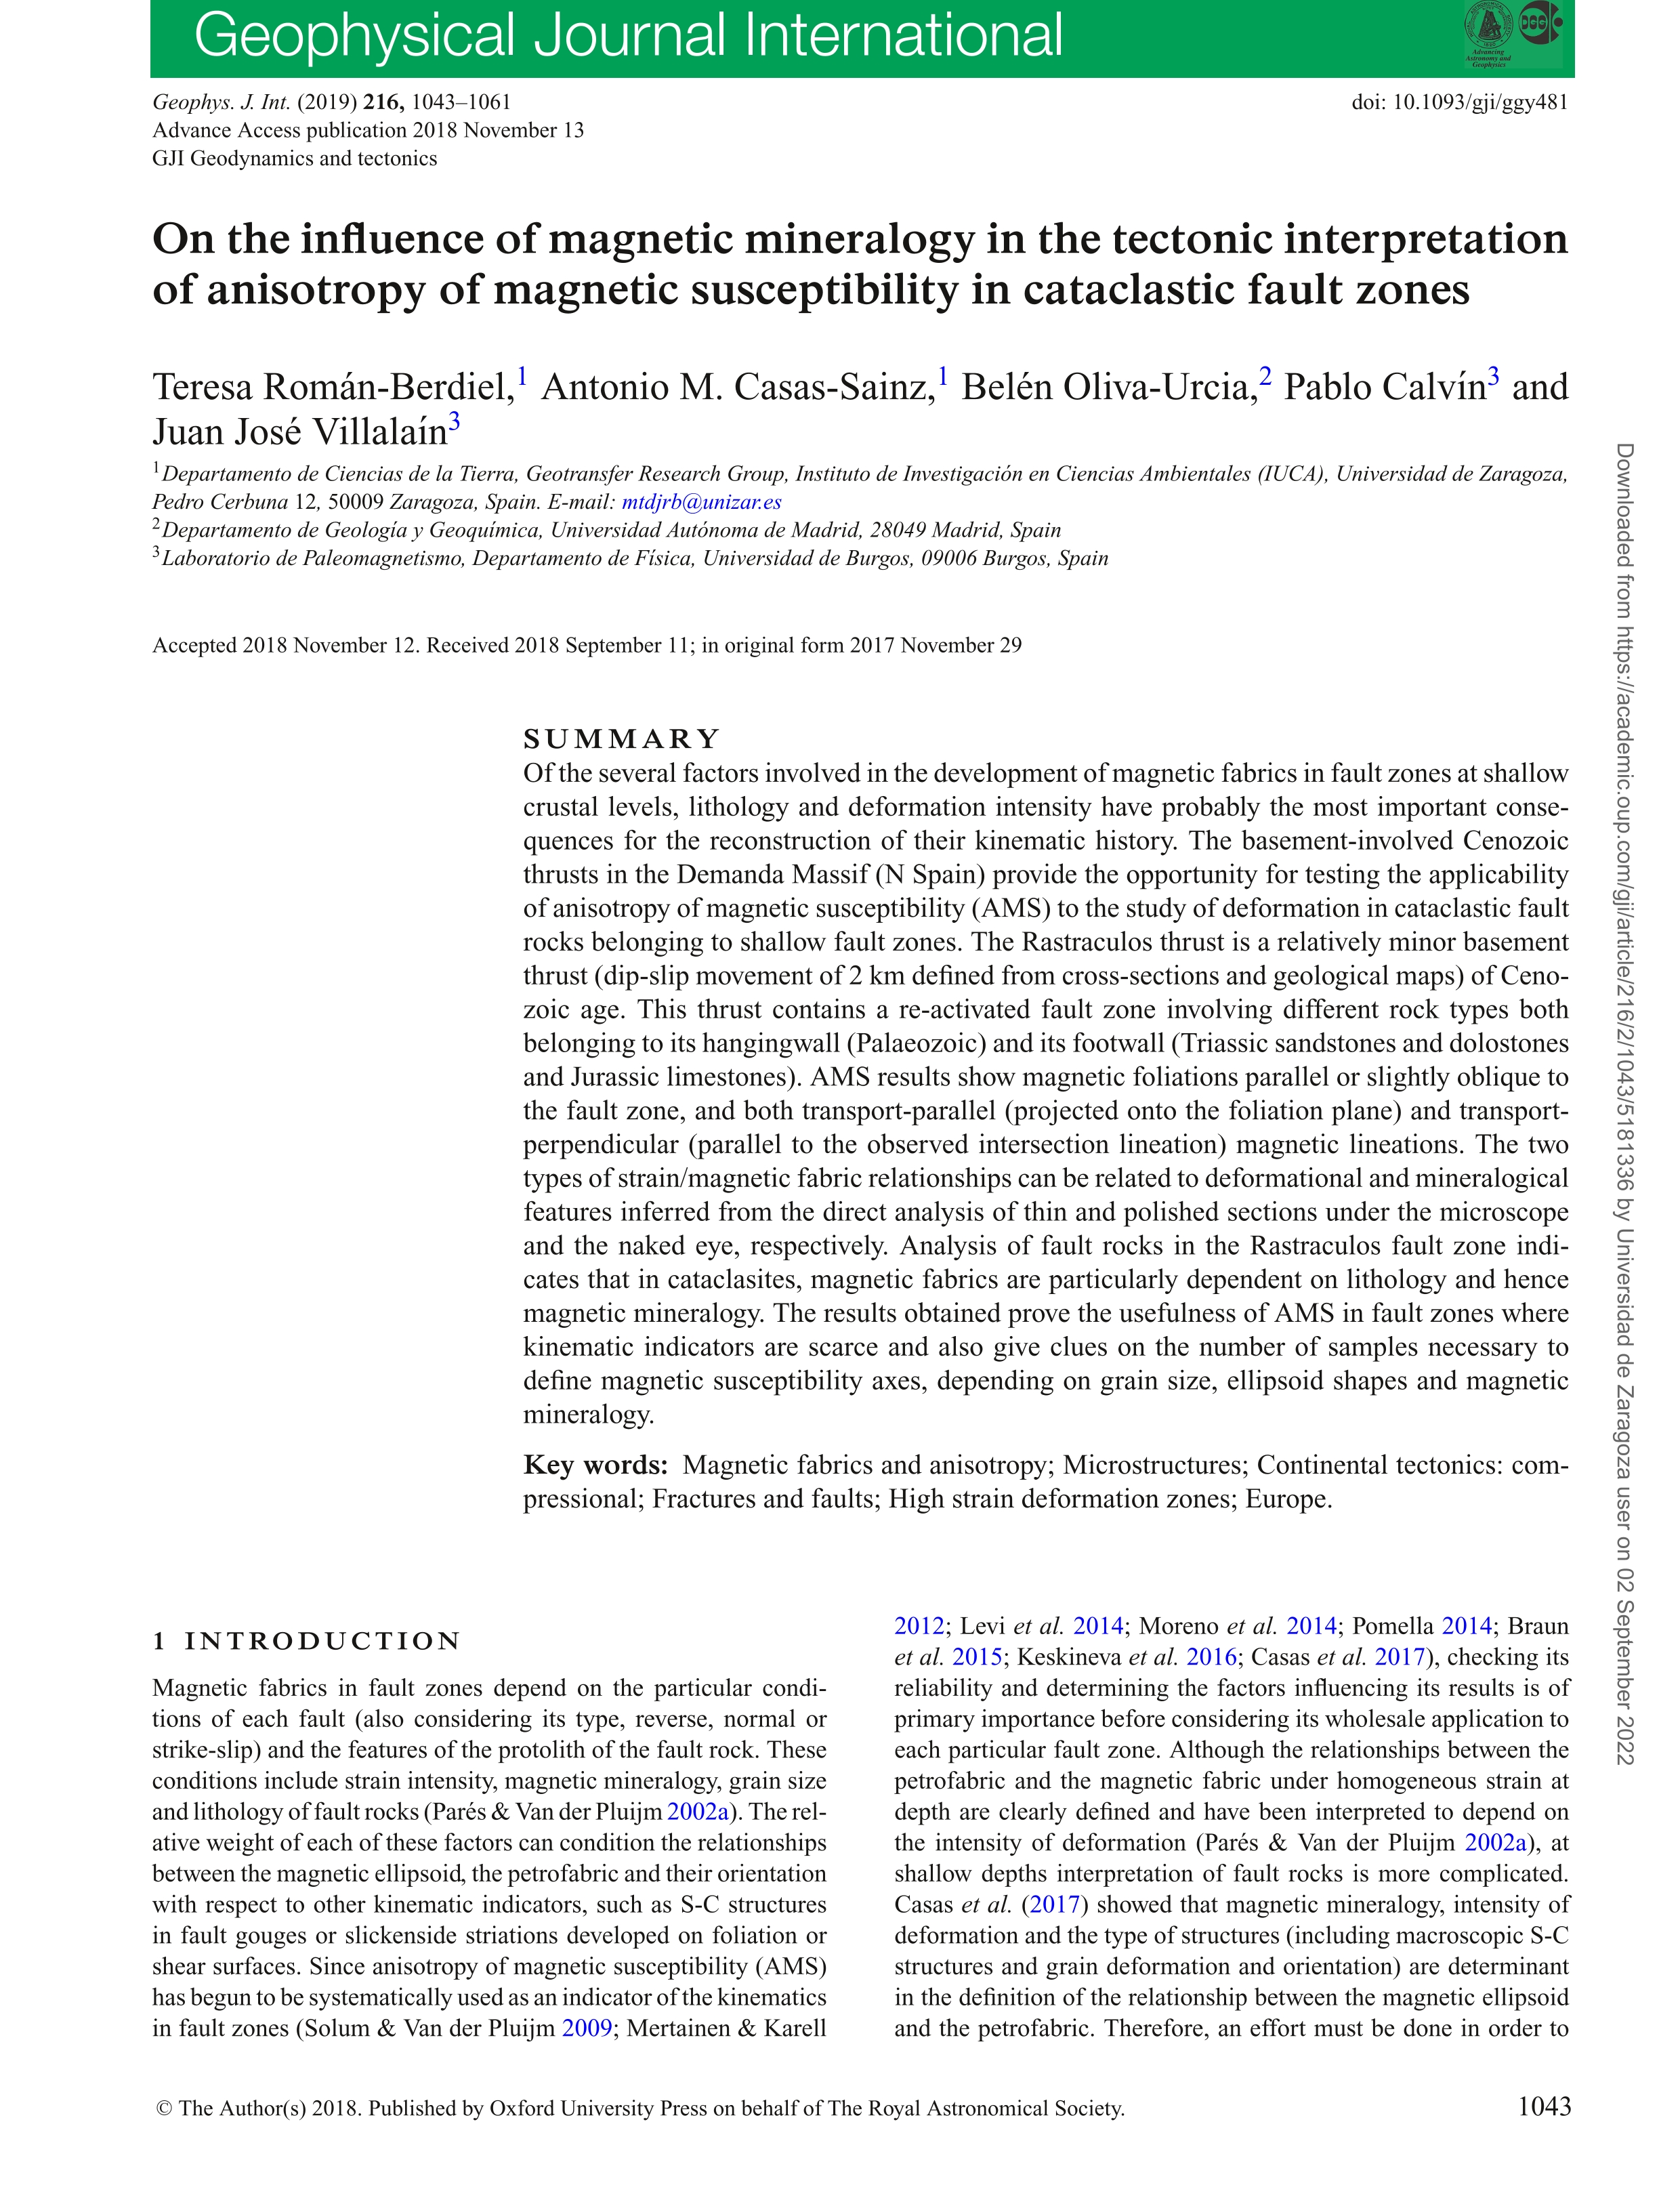 On the influence of magnetic mineralogy in the tectonic interpretation of anisotropy of magnetic susceptibility in cataclastic fault zones